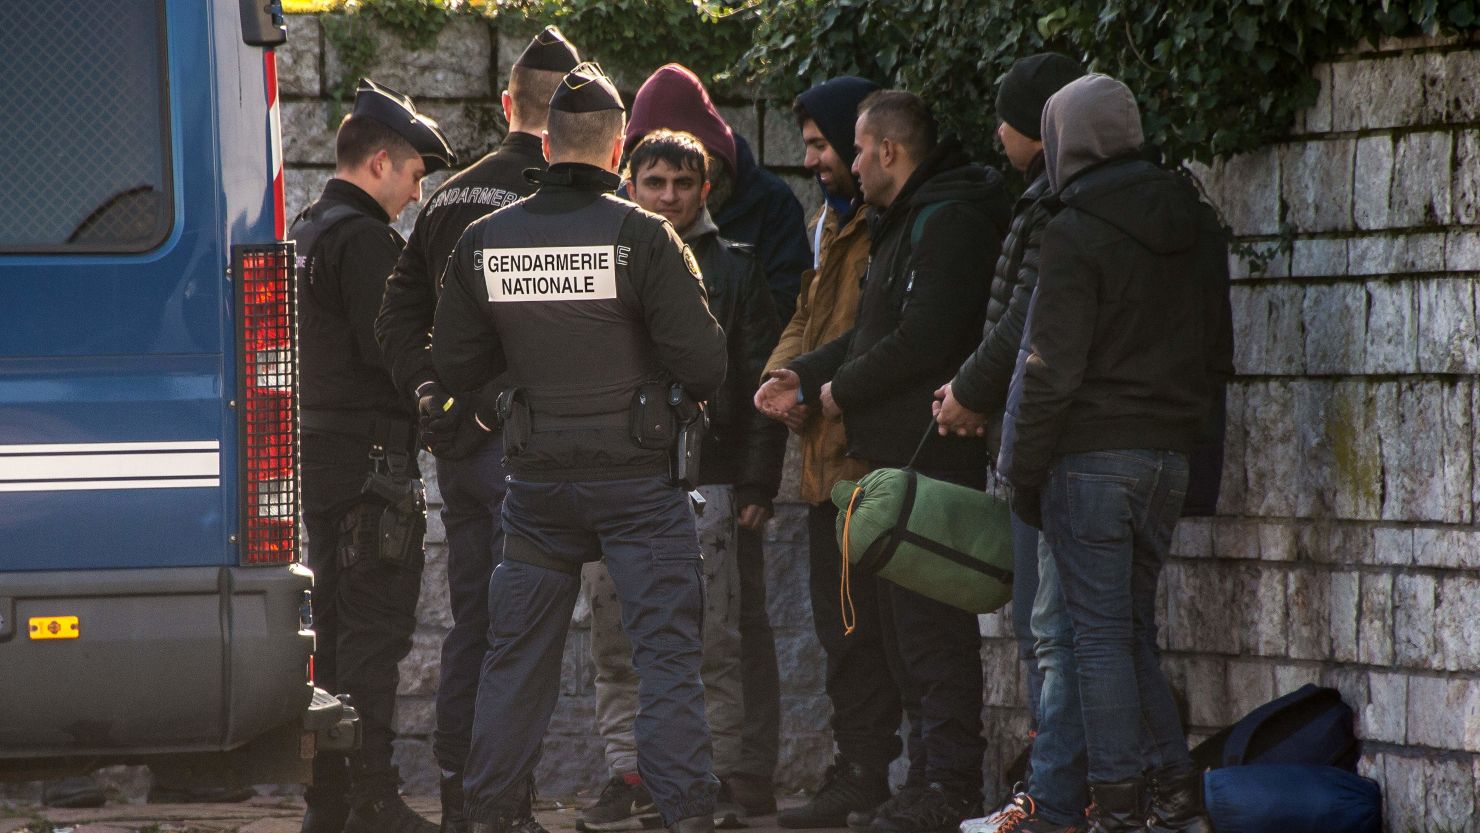 French police examine the identity documents of migrants in Calais.